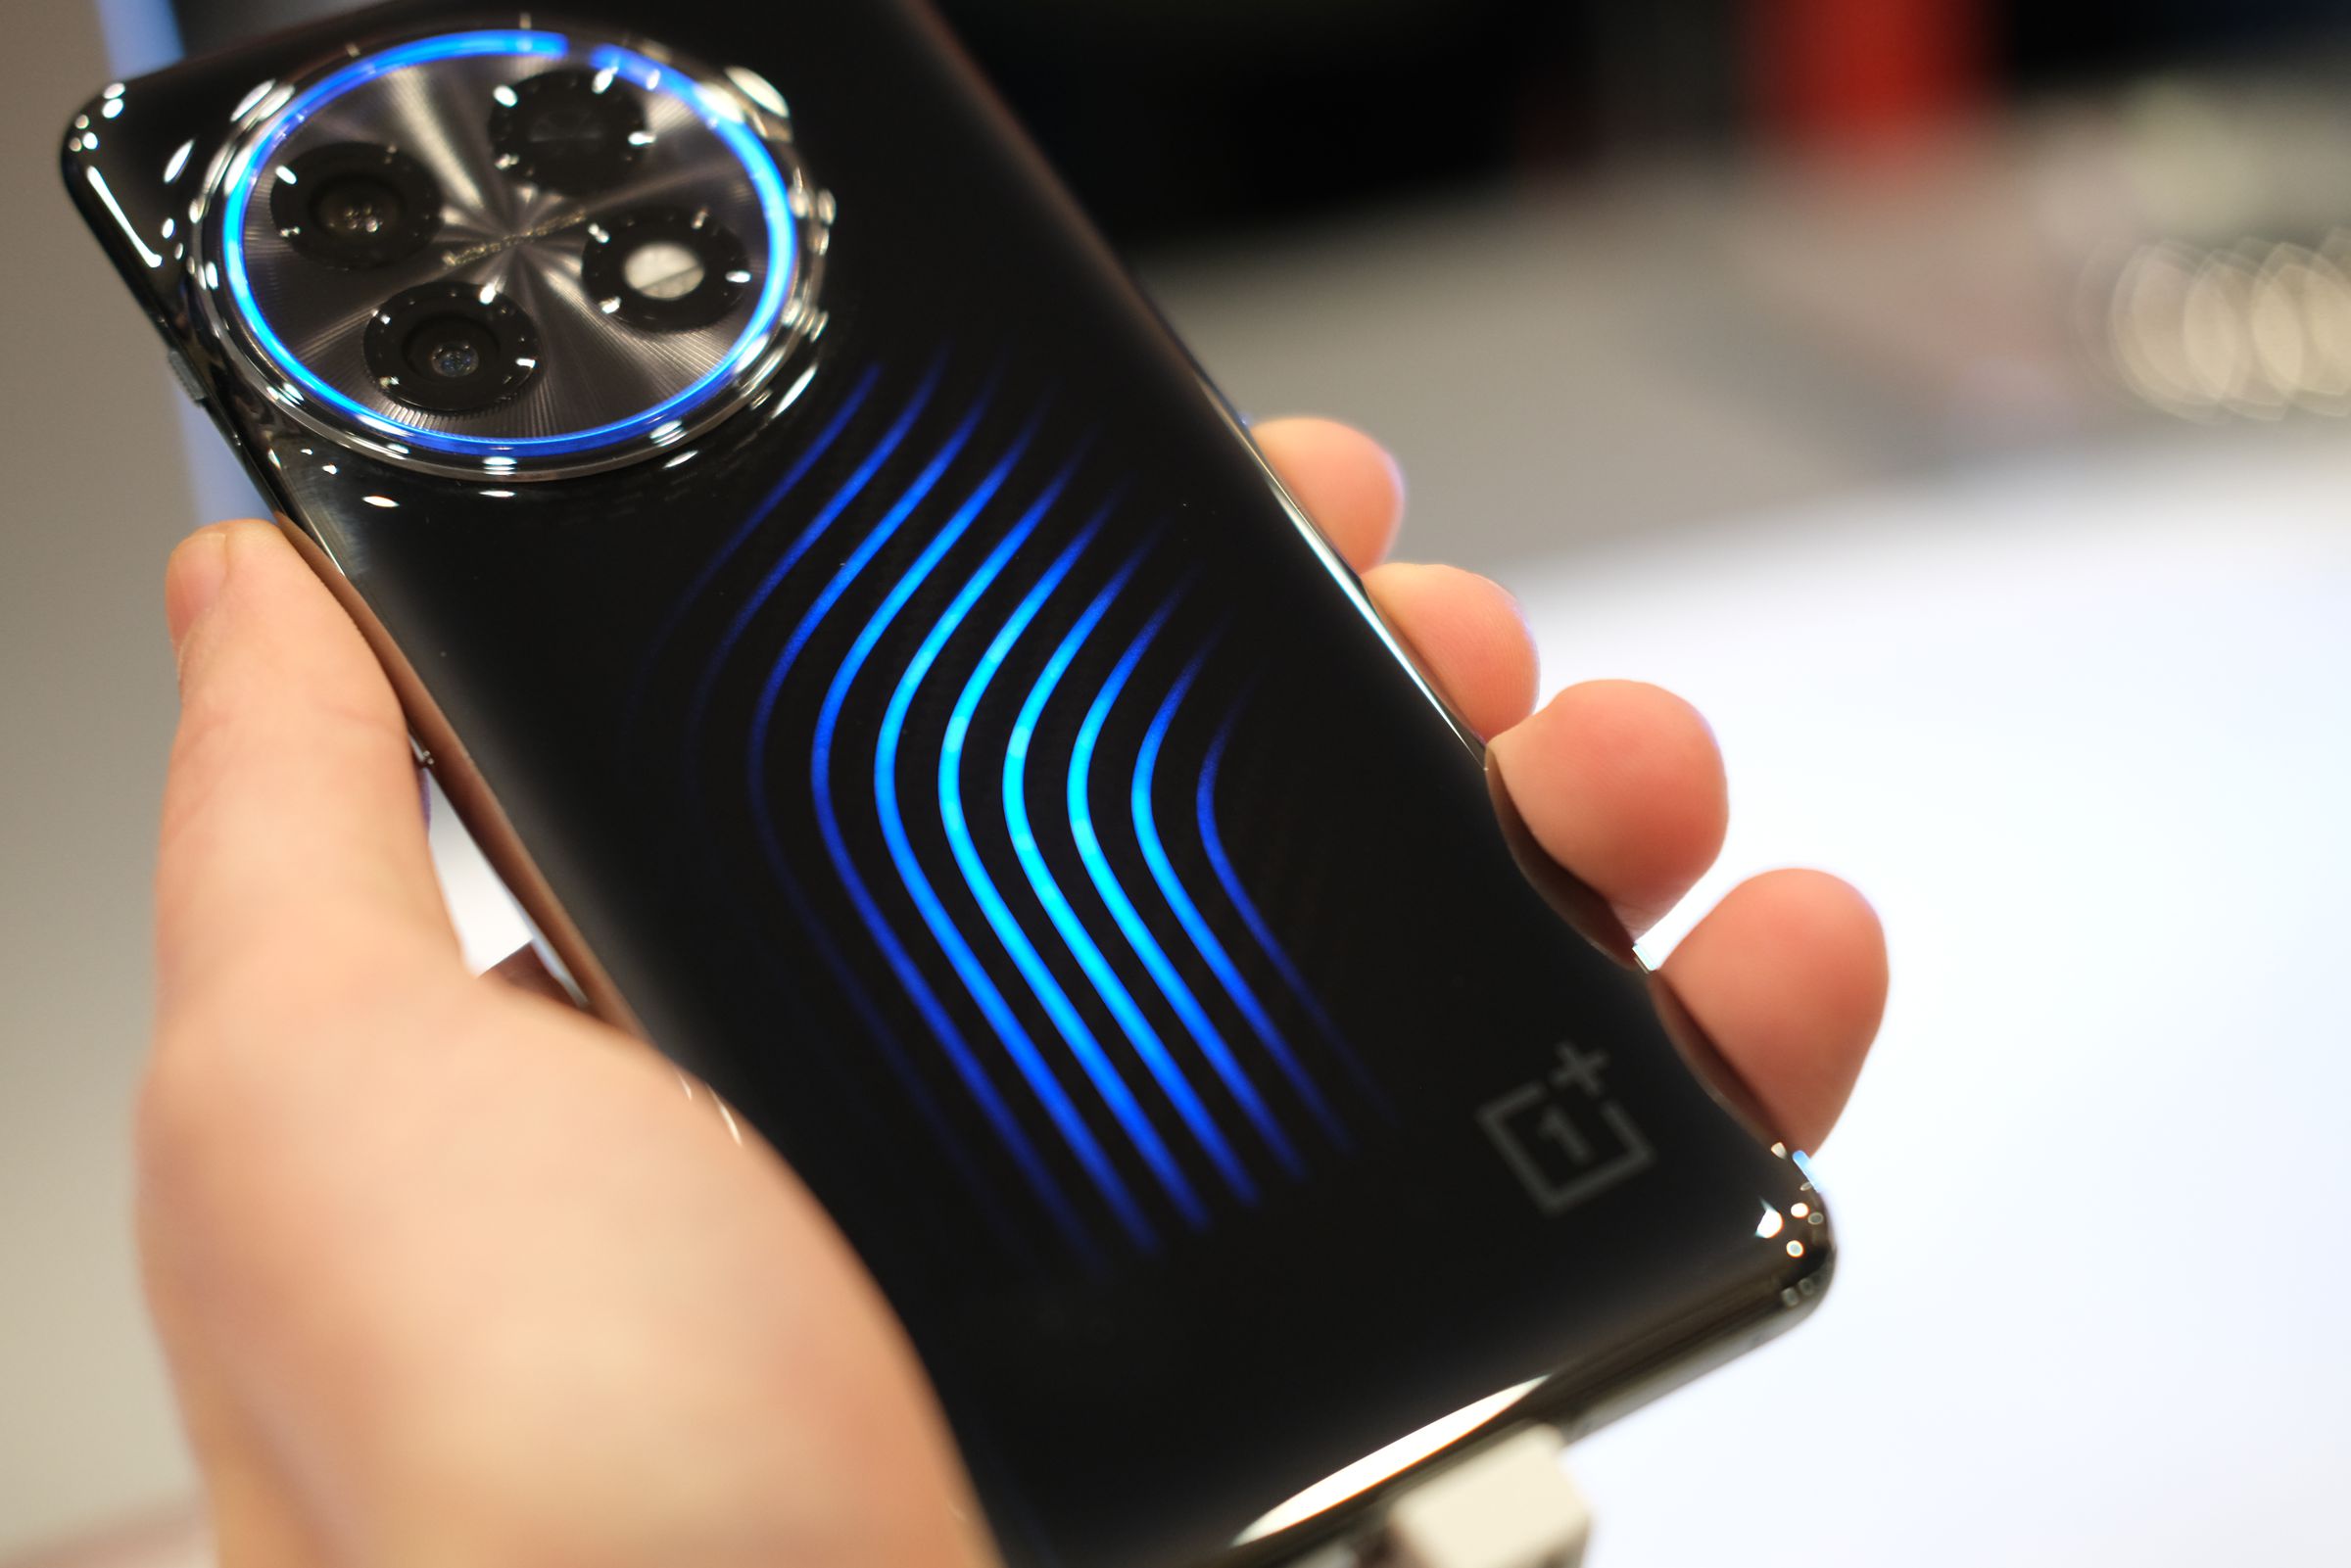 OnePlus new concept phone is its coolest yet